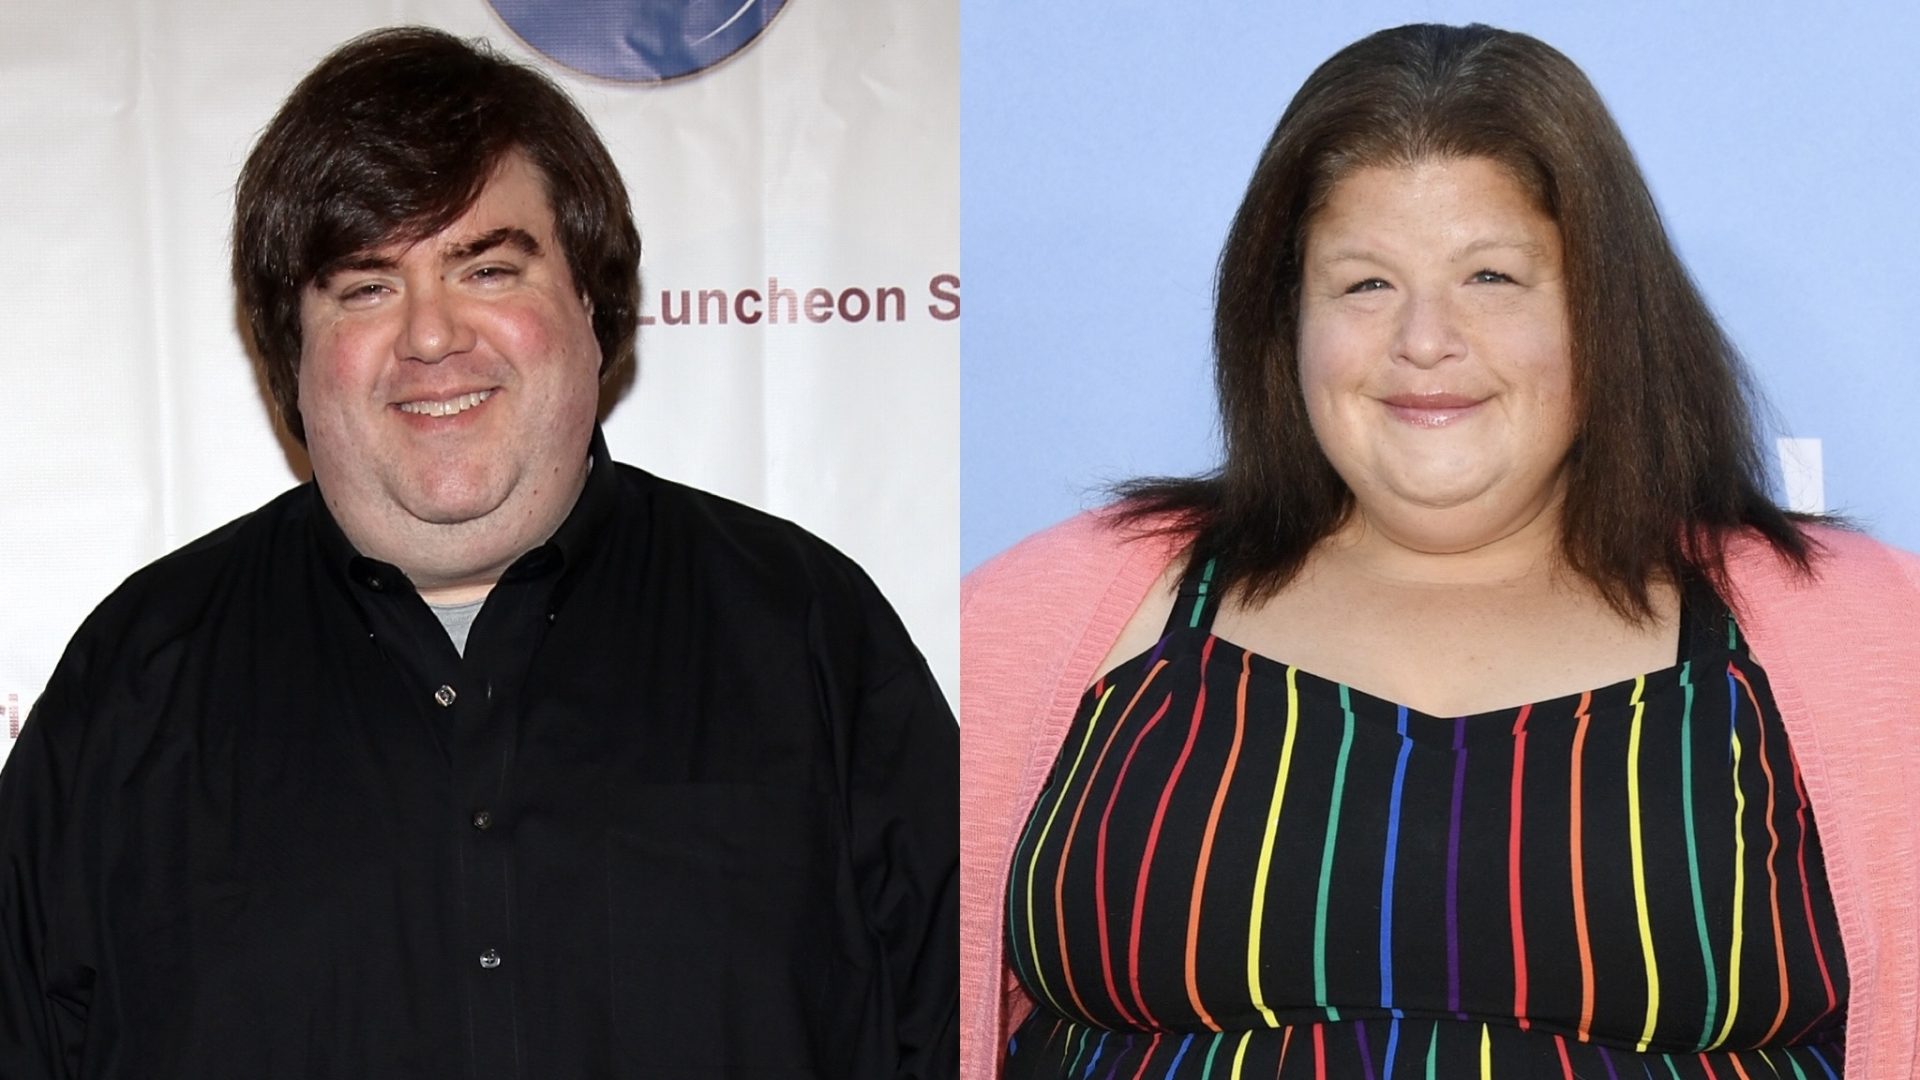 Dan Schneider Reacts After Former Nickeloden Star Lori Beth Denberg Accuses Him Of Sexual Misconduct